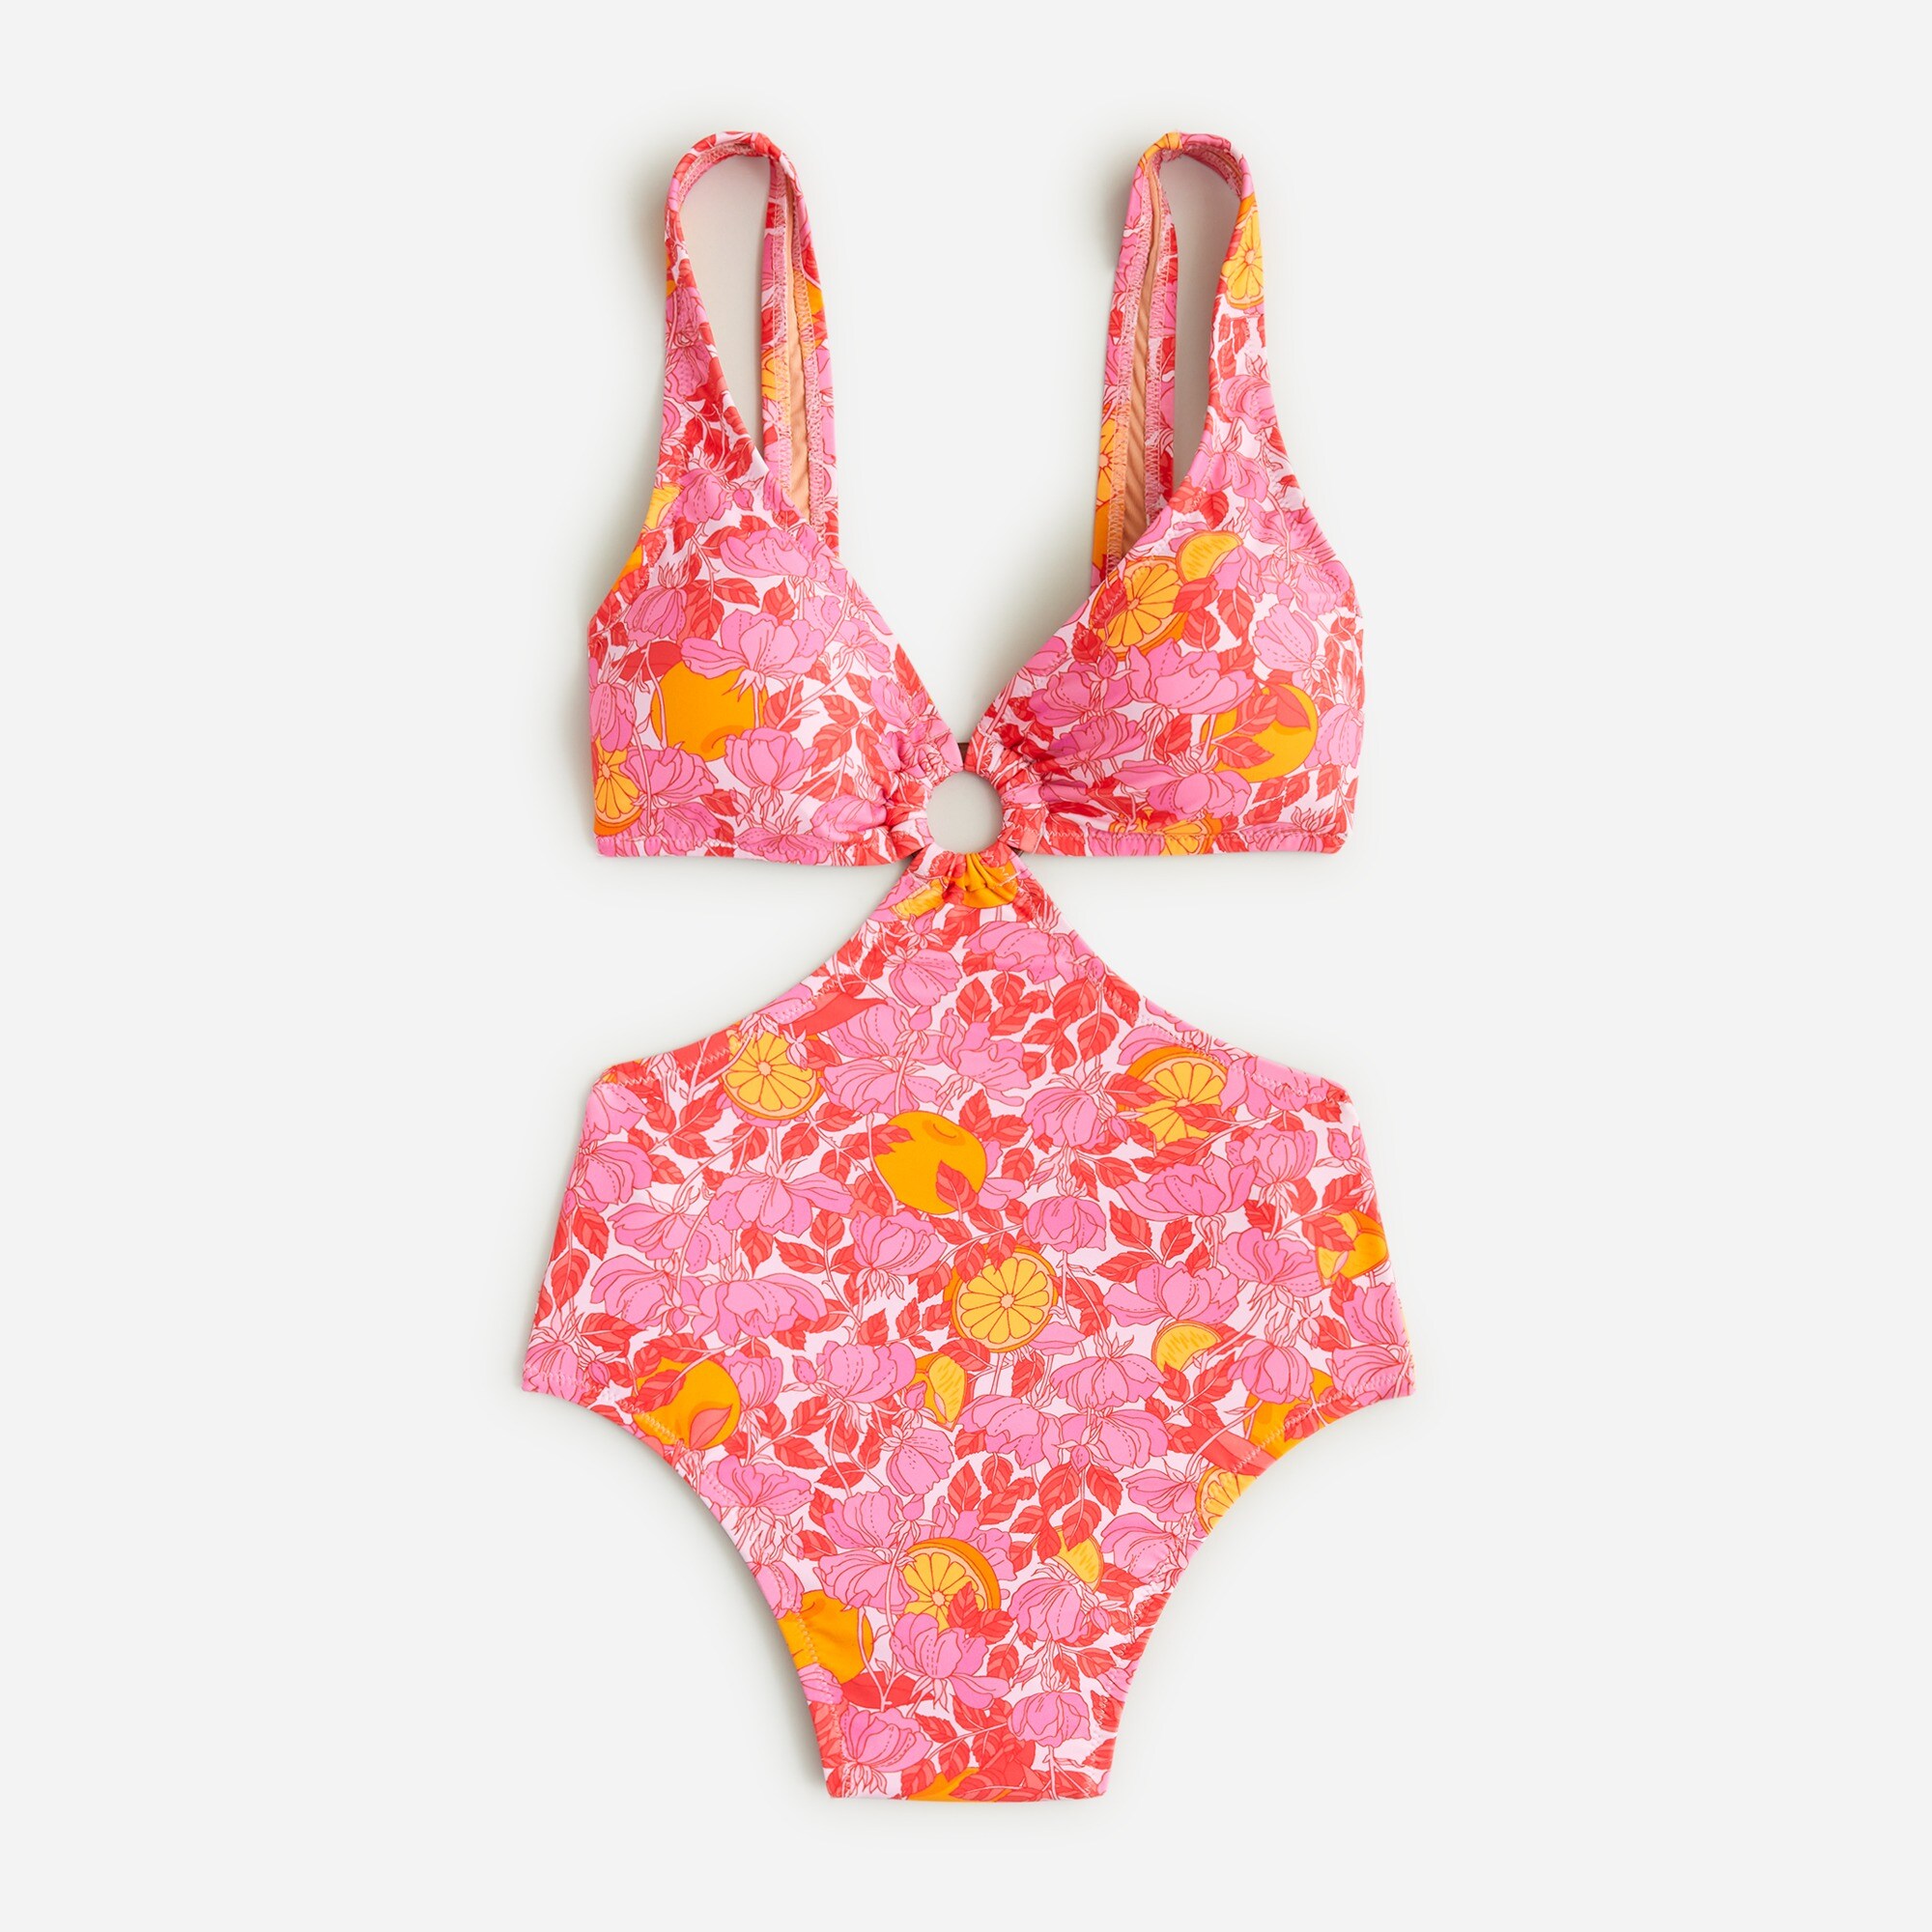  O-ring cutout one-piece swimsuit in pink limone print